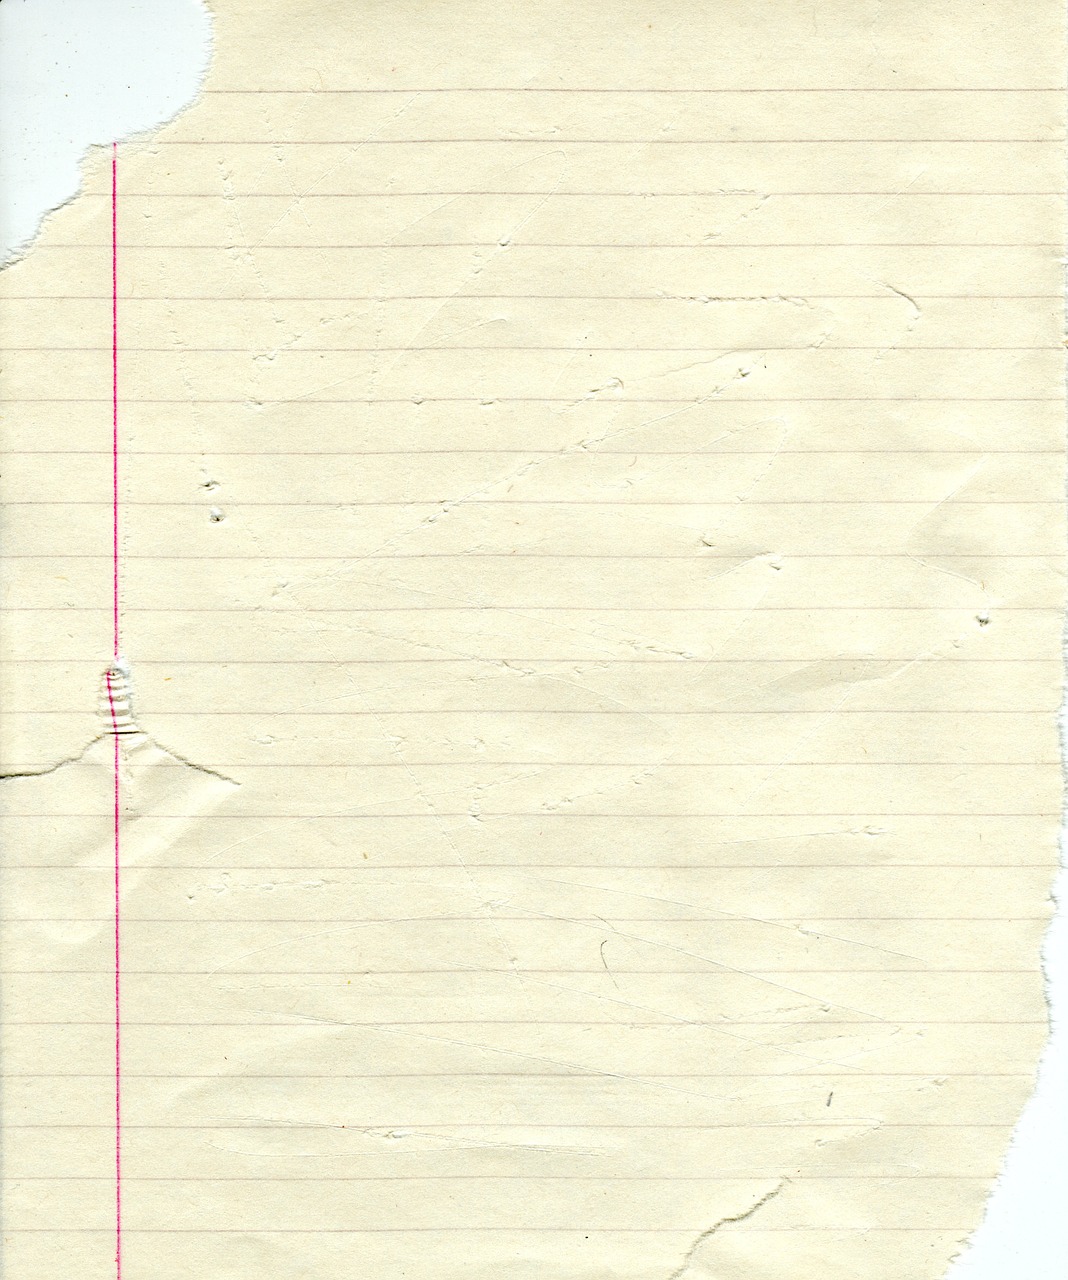 ripped paper legal pad free photo